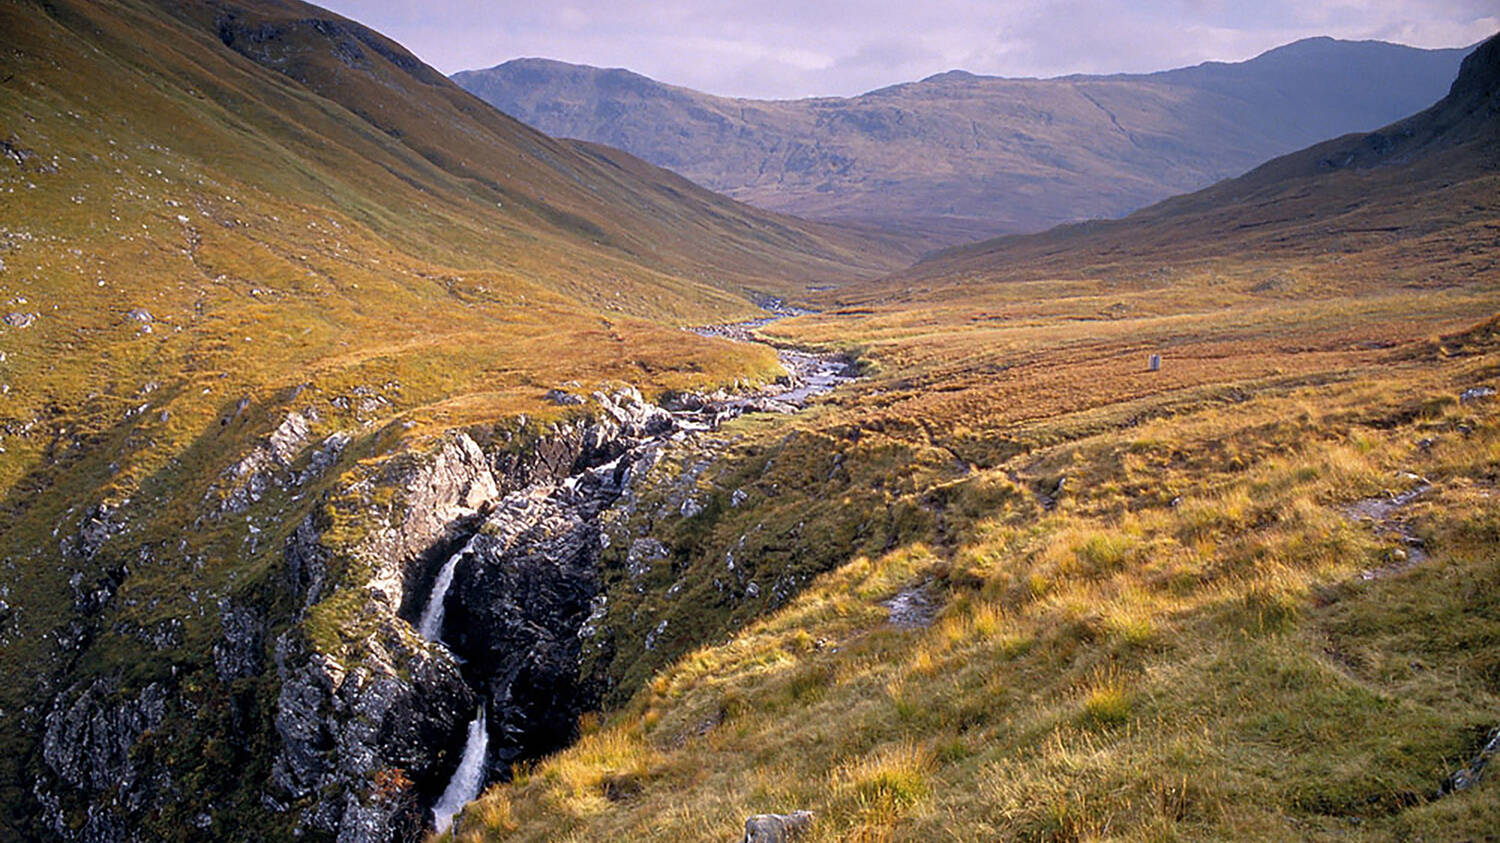 A river runs through a moorland valley, surrounded by tall mountains. In the foreground, it plunges over a long rocky drop, creating a white waterfall.